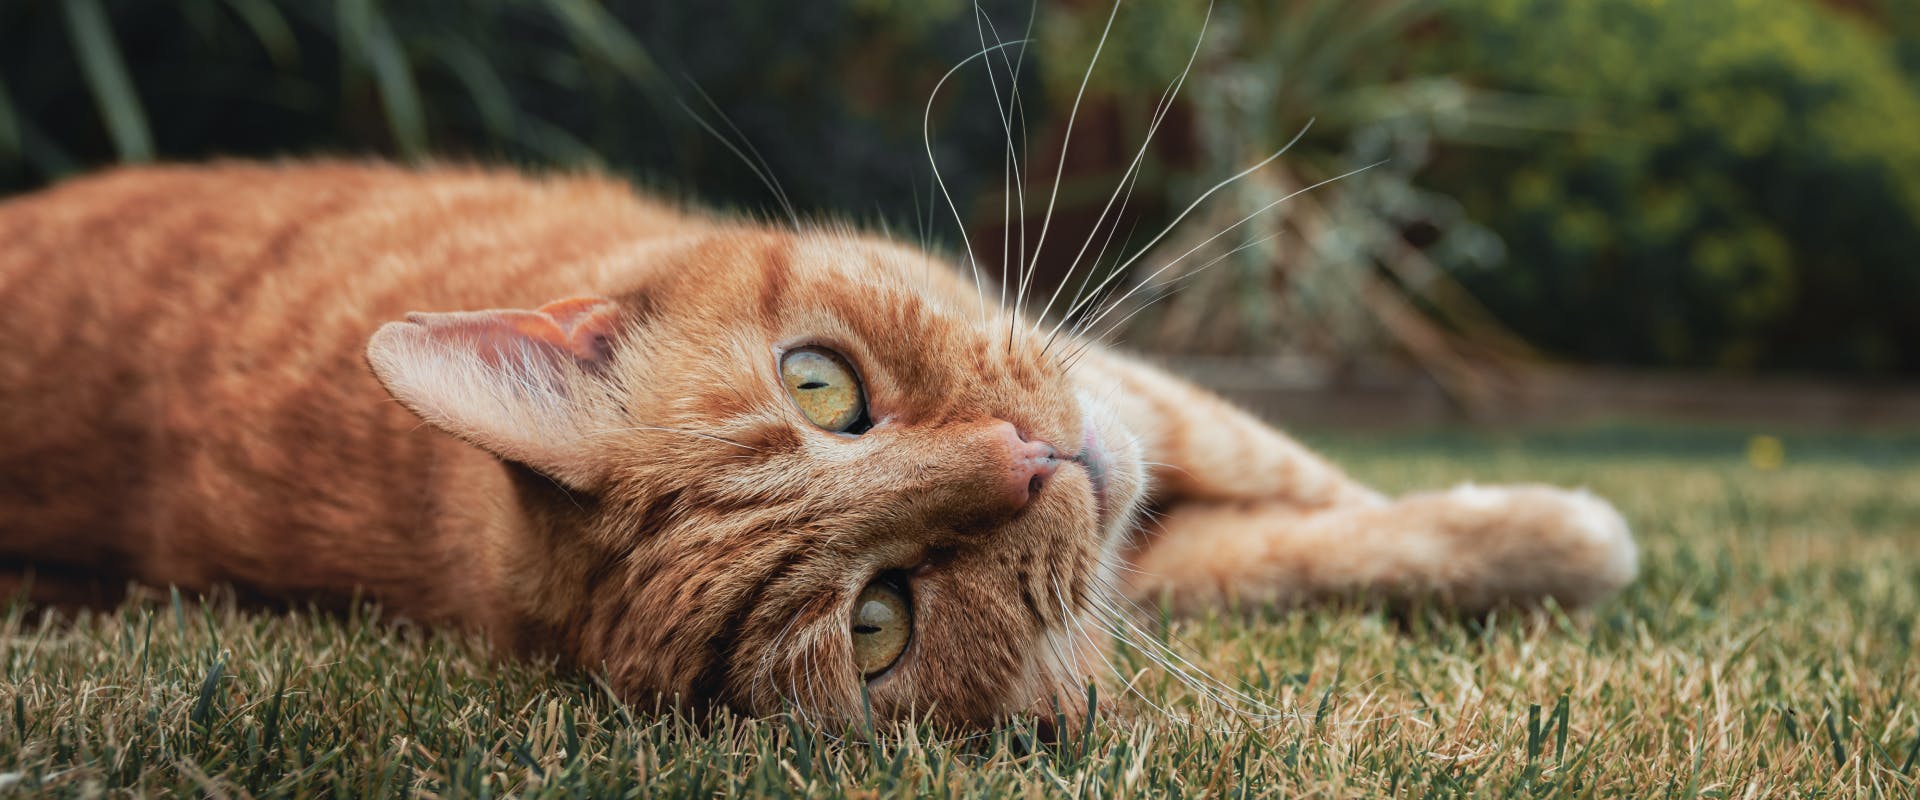 a ginger tabby cat lying on a grass lawn looking past the camera